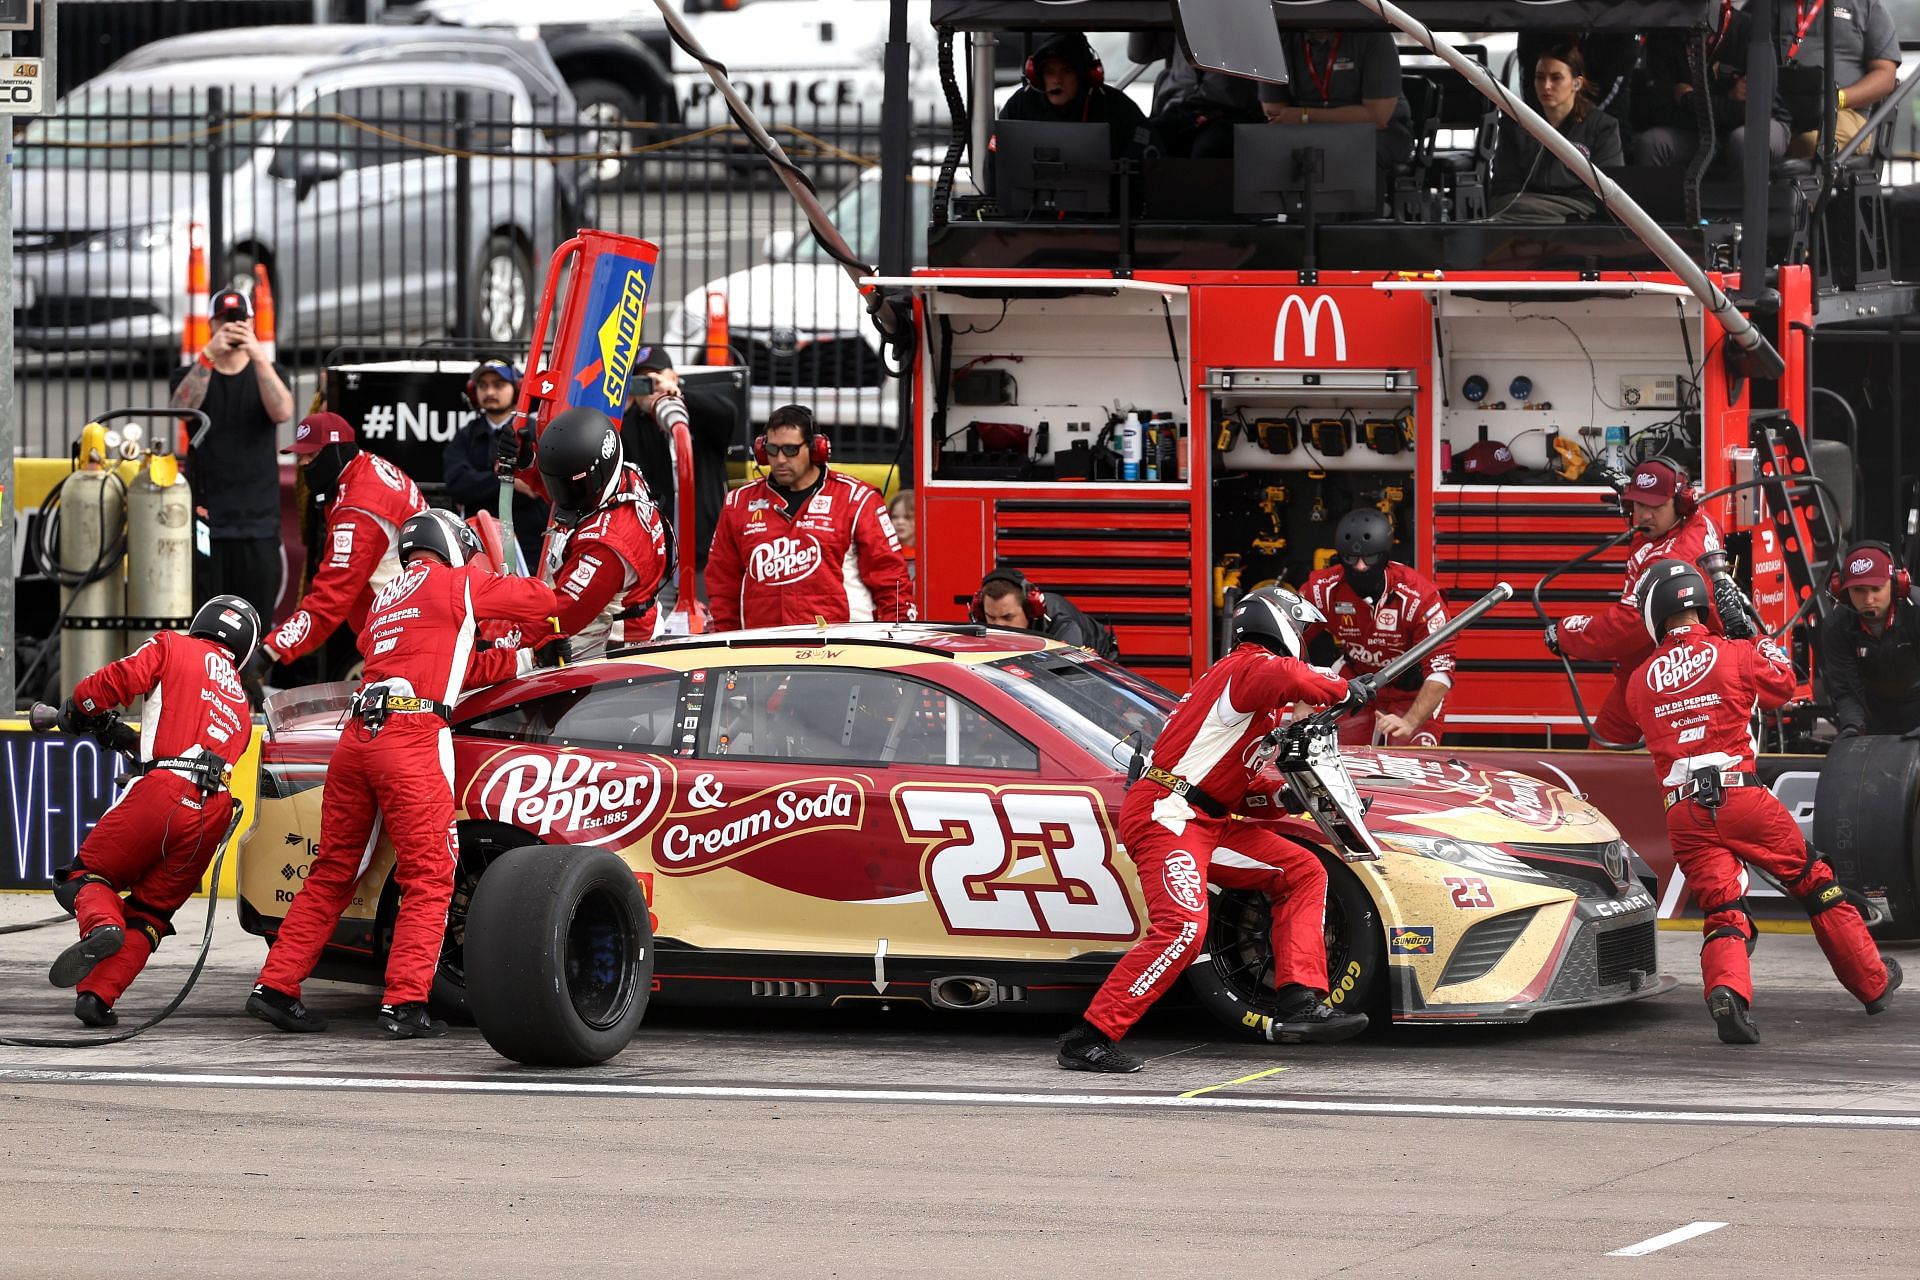 Bubba Wallace Jr. pits during the NASCAR Cup Series Pennzoil 400 at Las Vegas Motor Speedway.